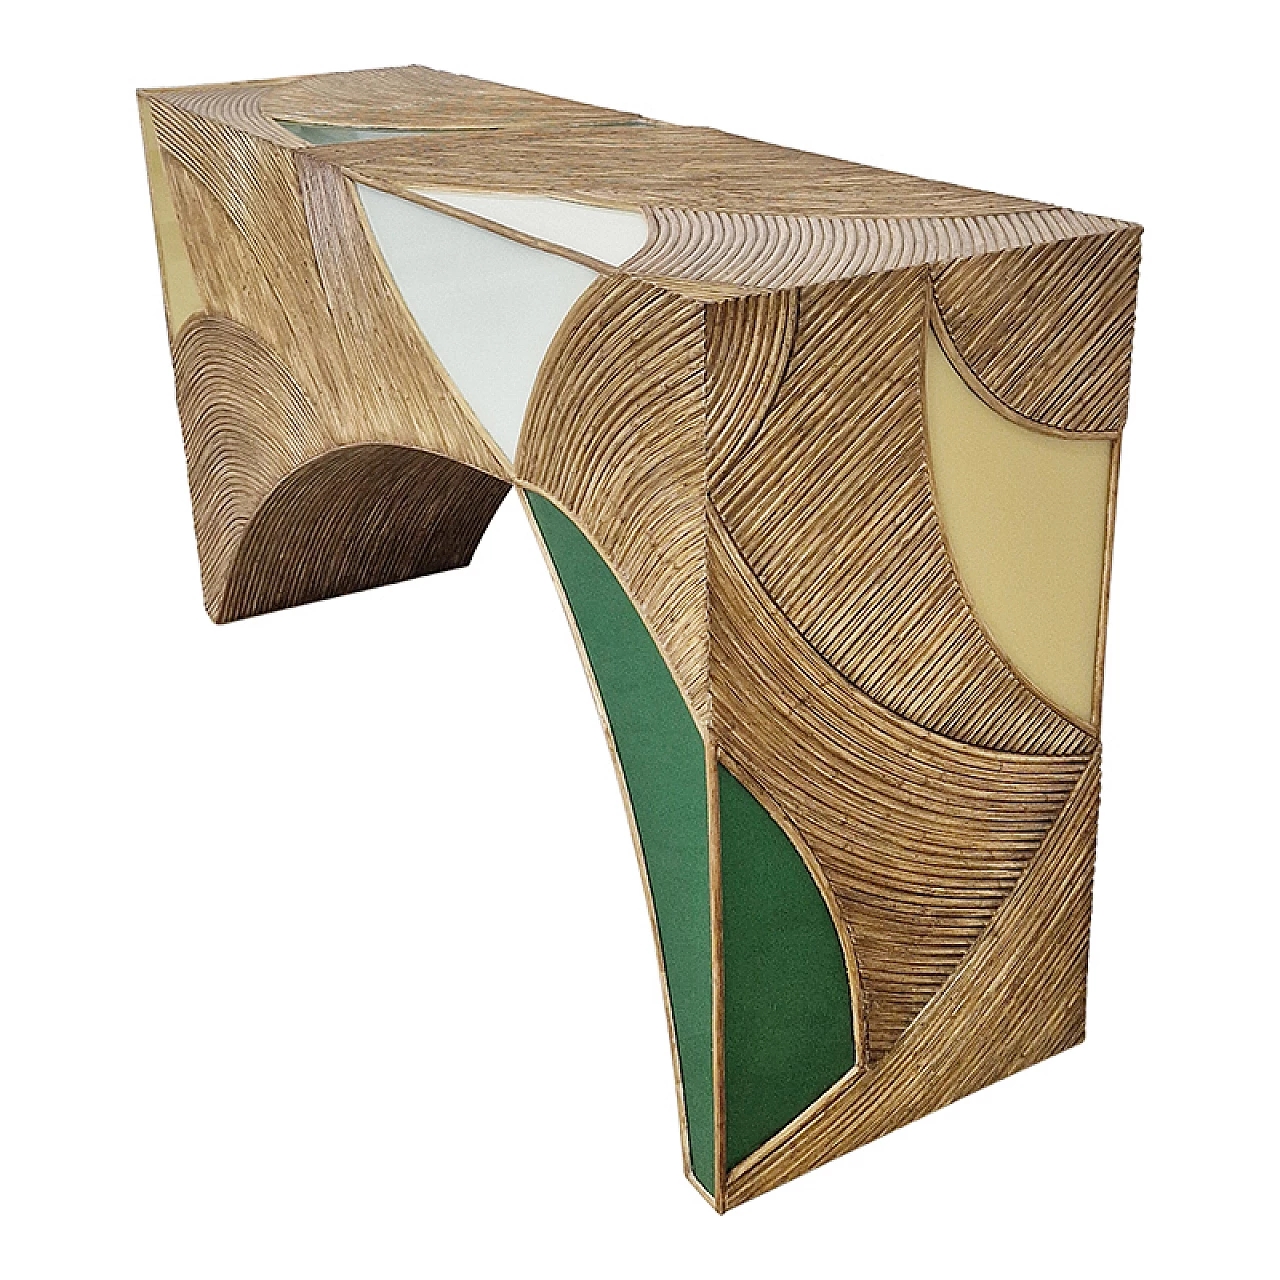 Wooden console covered in bamboo and white, yellow & green glass 4